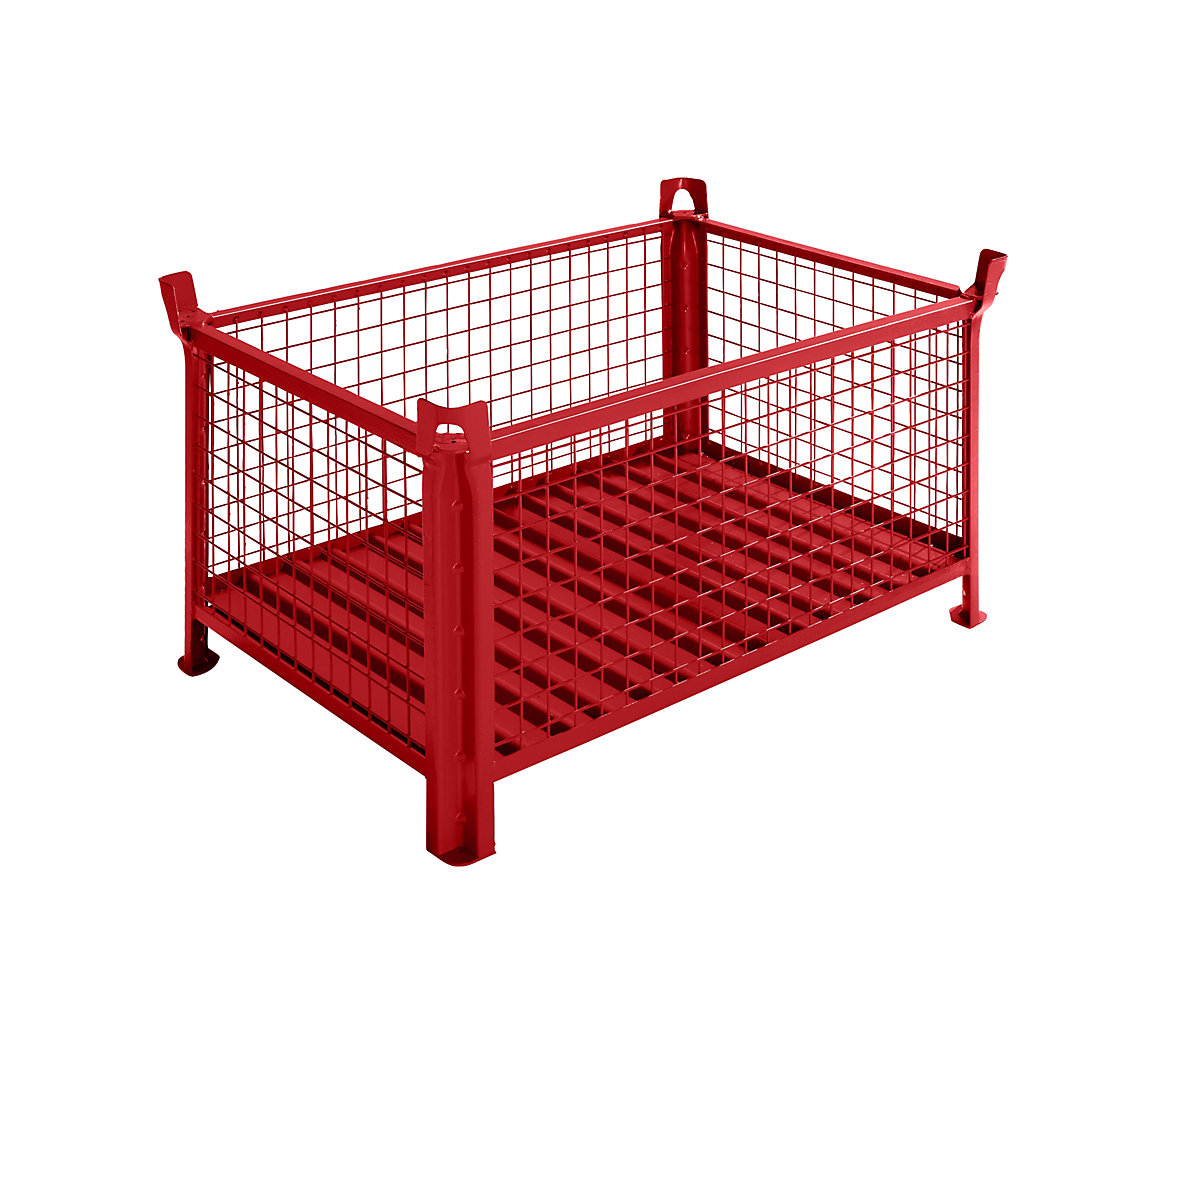 Box pallet with sheet steel base – Heson, LxW 1200 x 800 mm, painted red, 5+ items-3